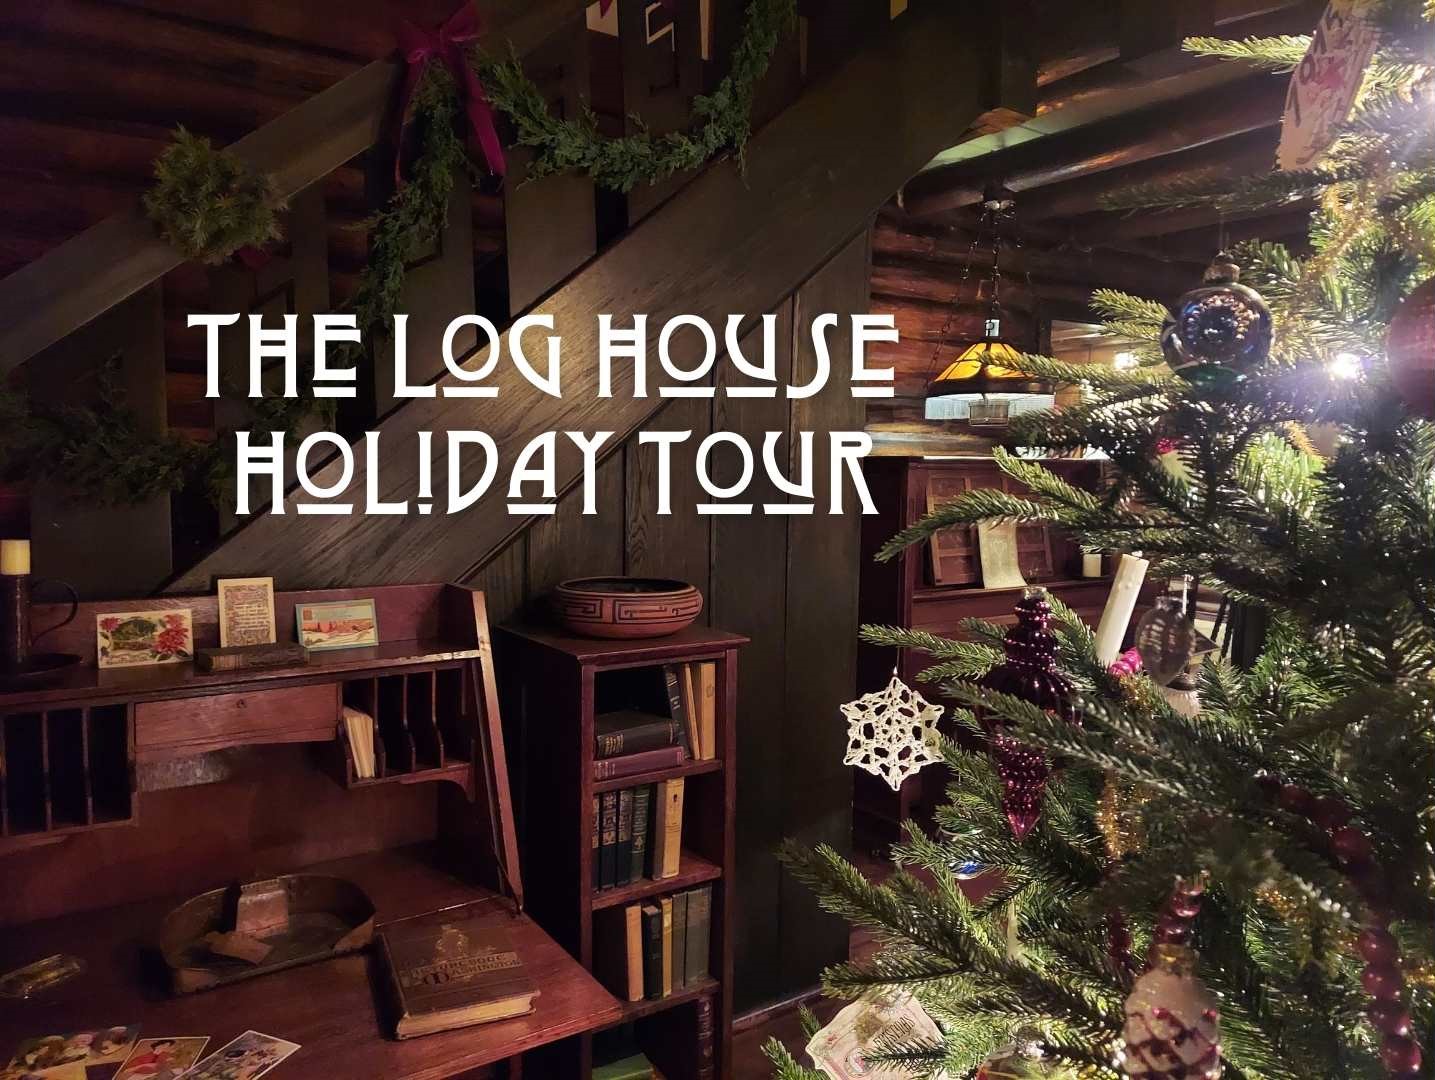 Holiday Tour of Stickley's Log House